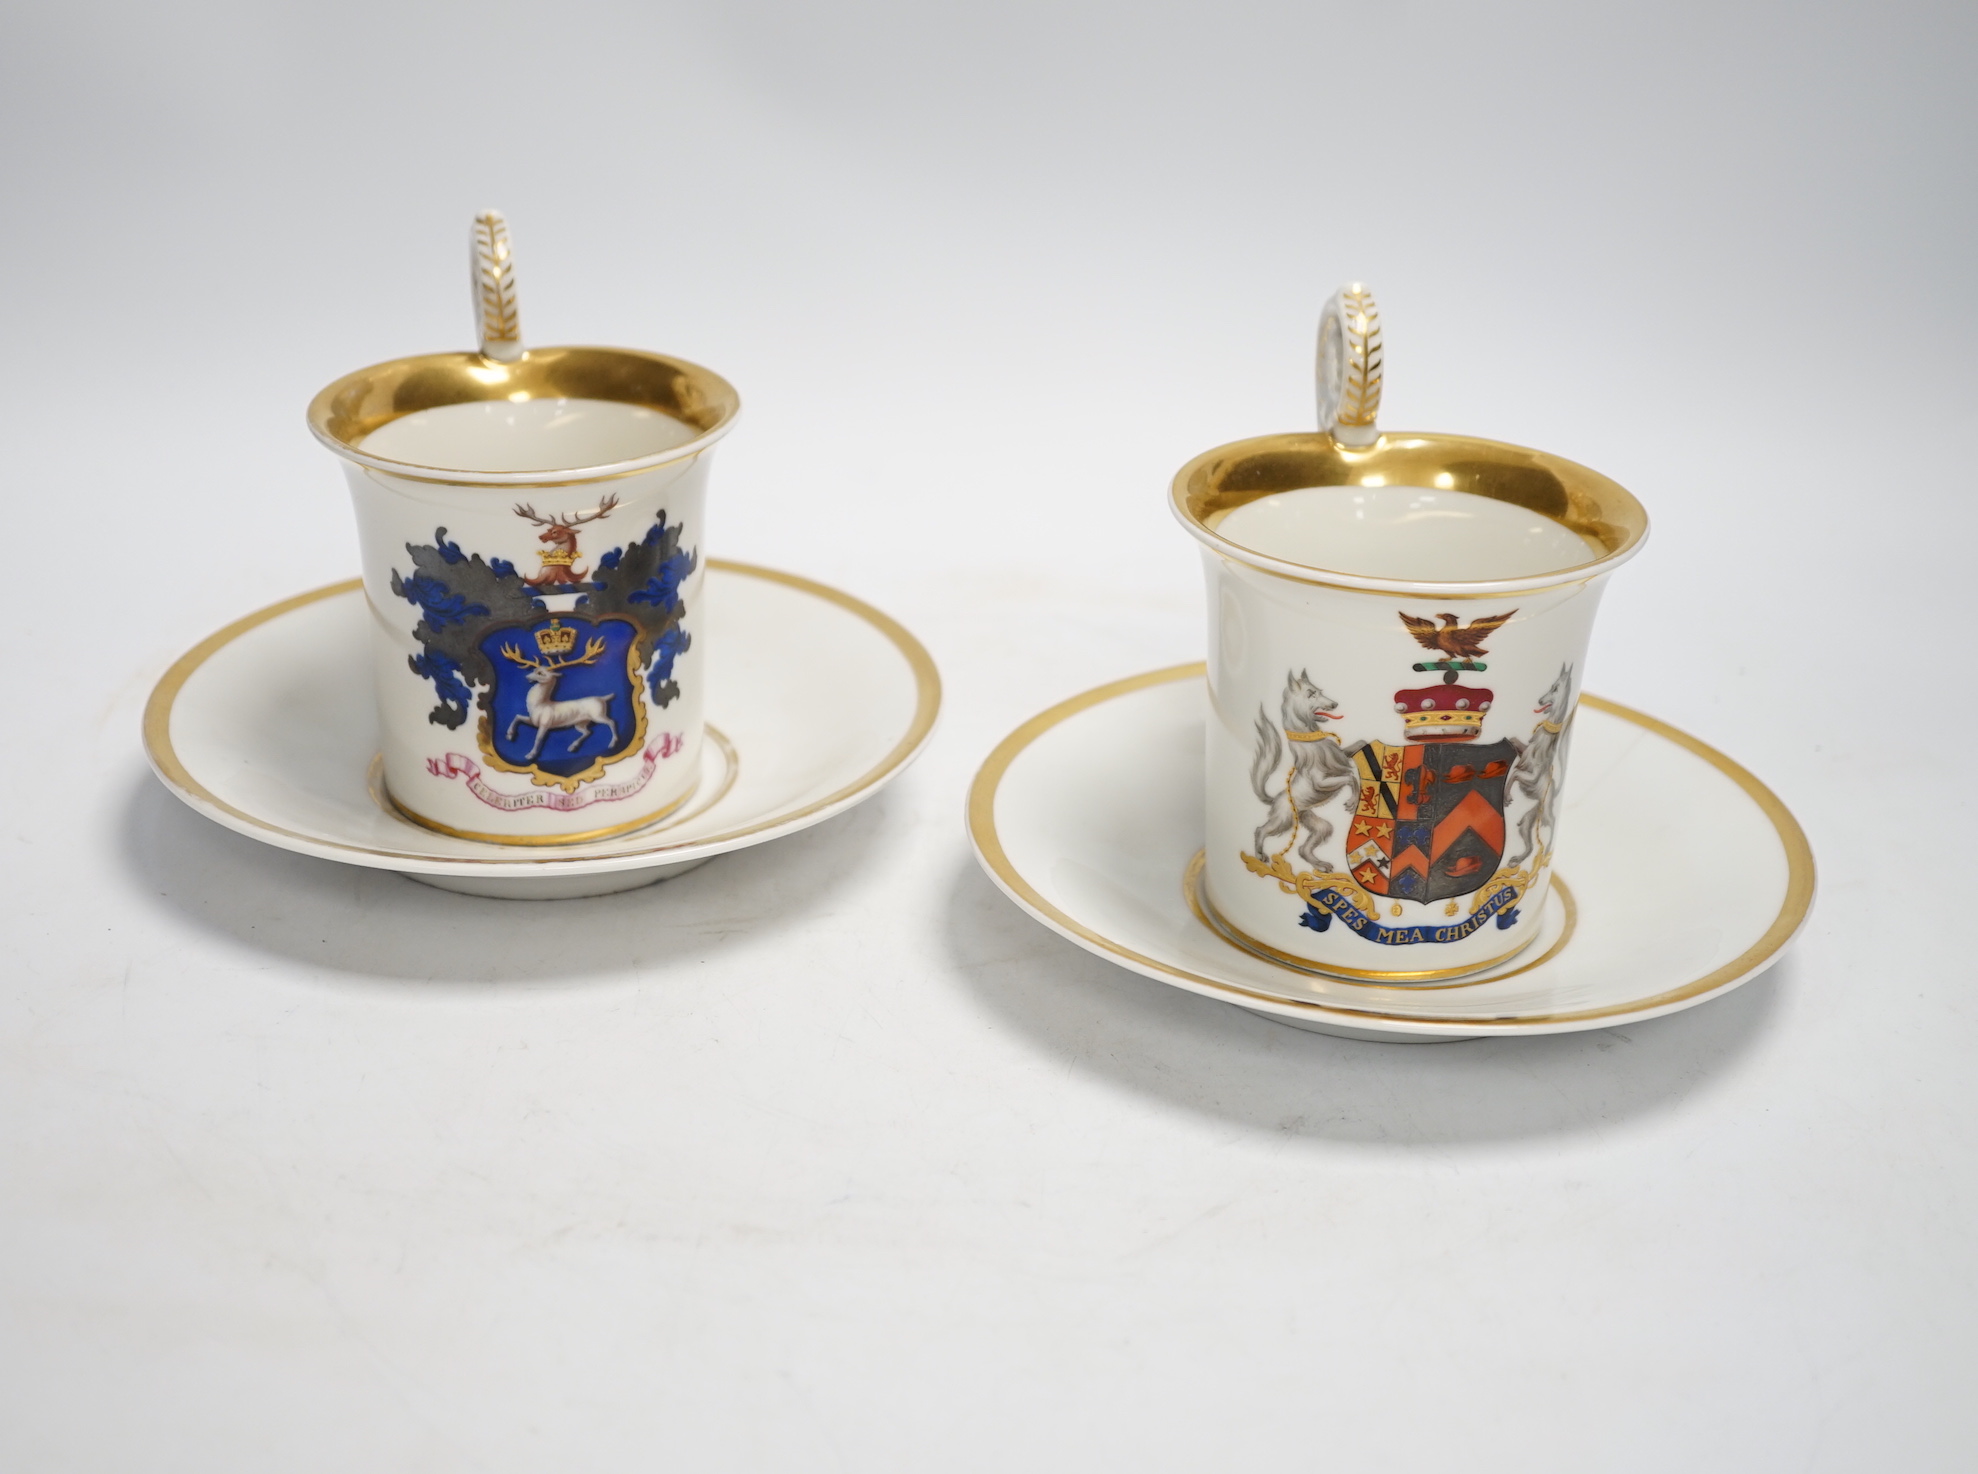 A pair of German porcelain armorial cups and saucers, one saucer reads ‘Lord Bingham s/m Y. Powell. Born 1848’